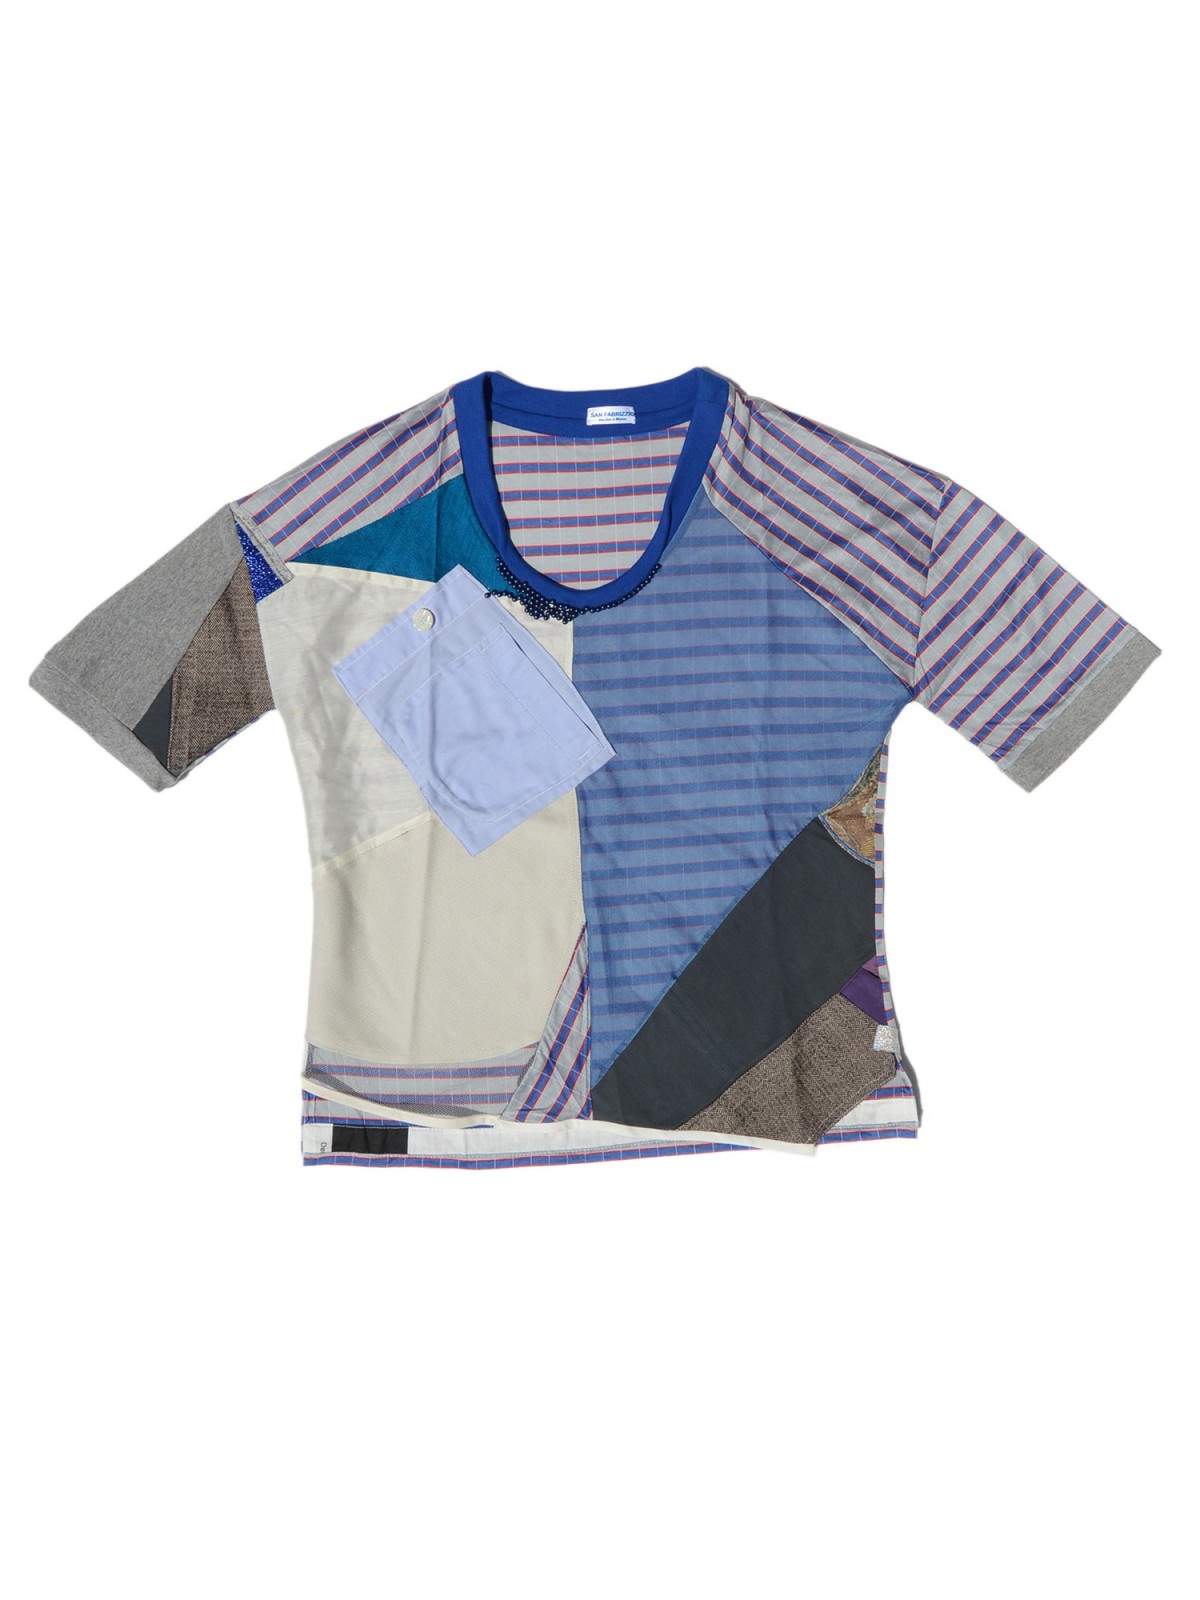 T-shirt in patchwork with blue low neck